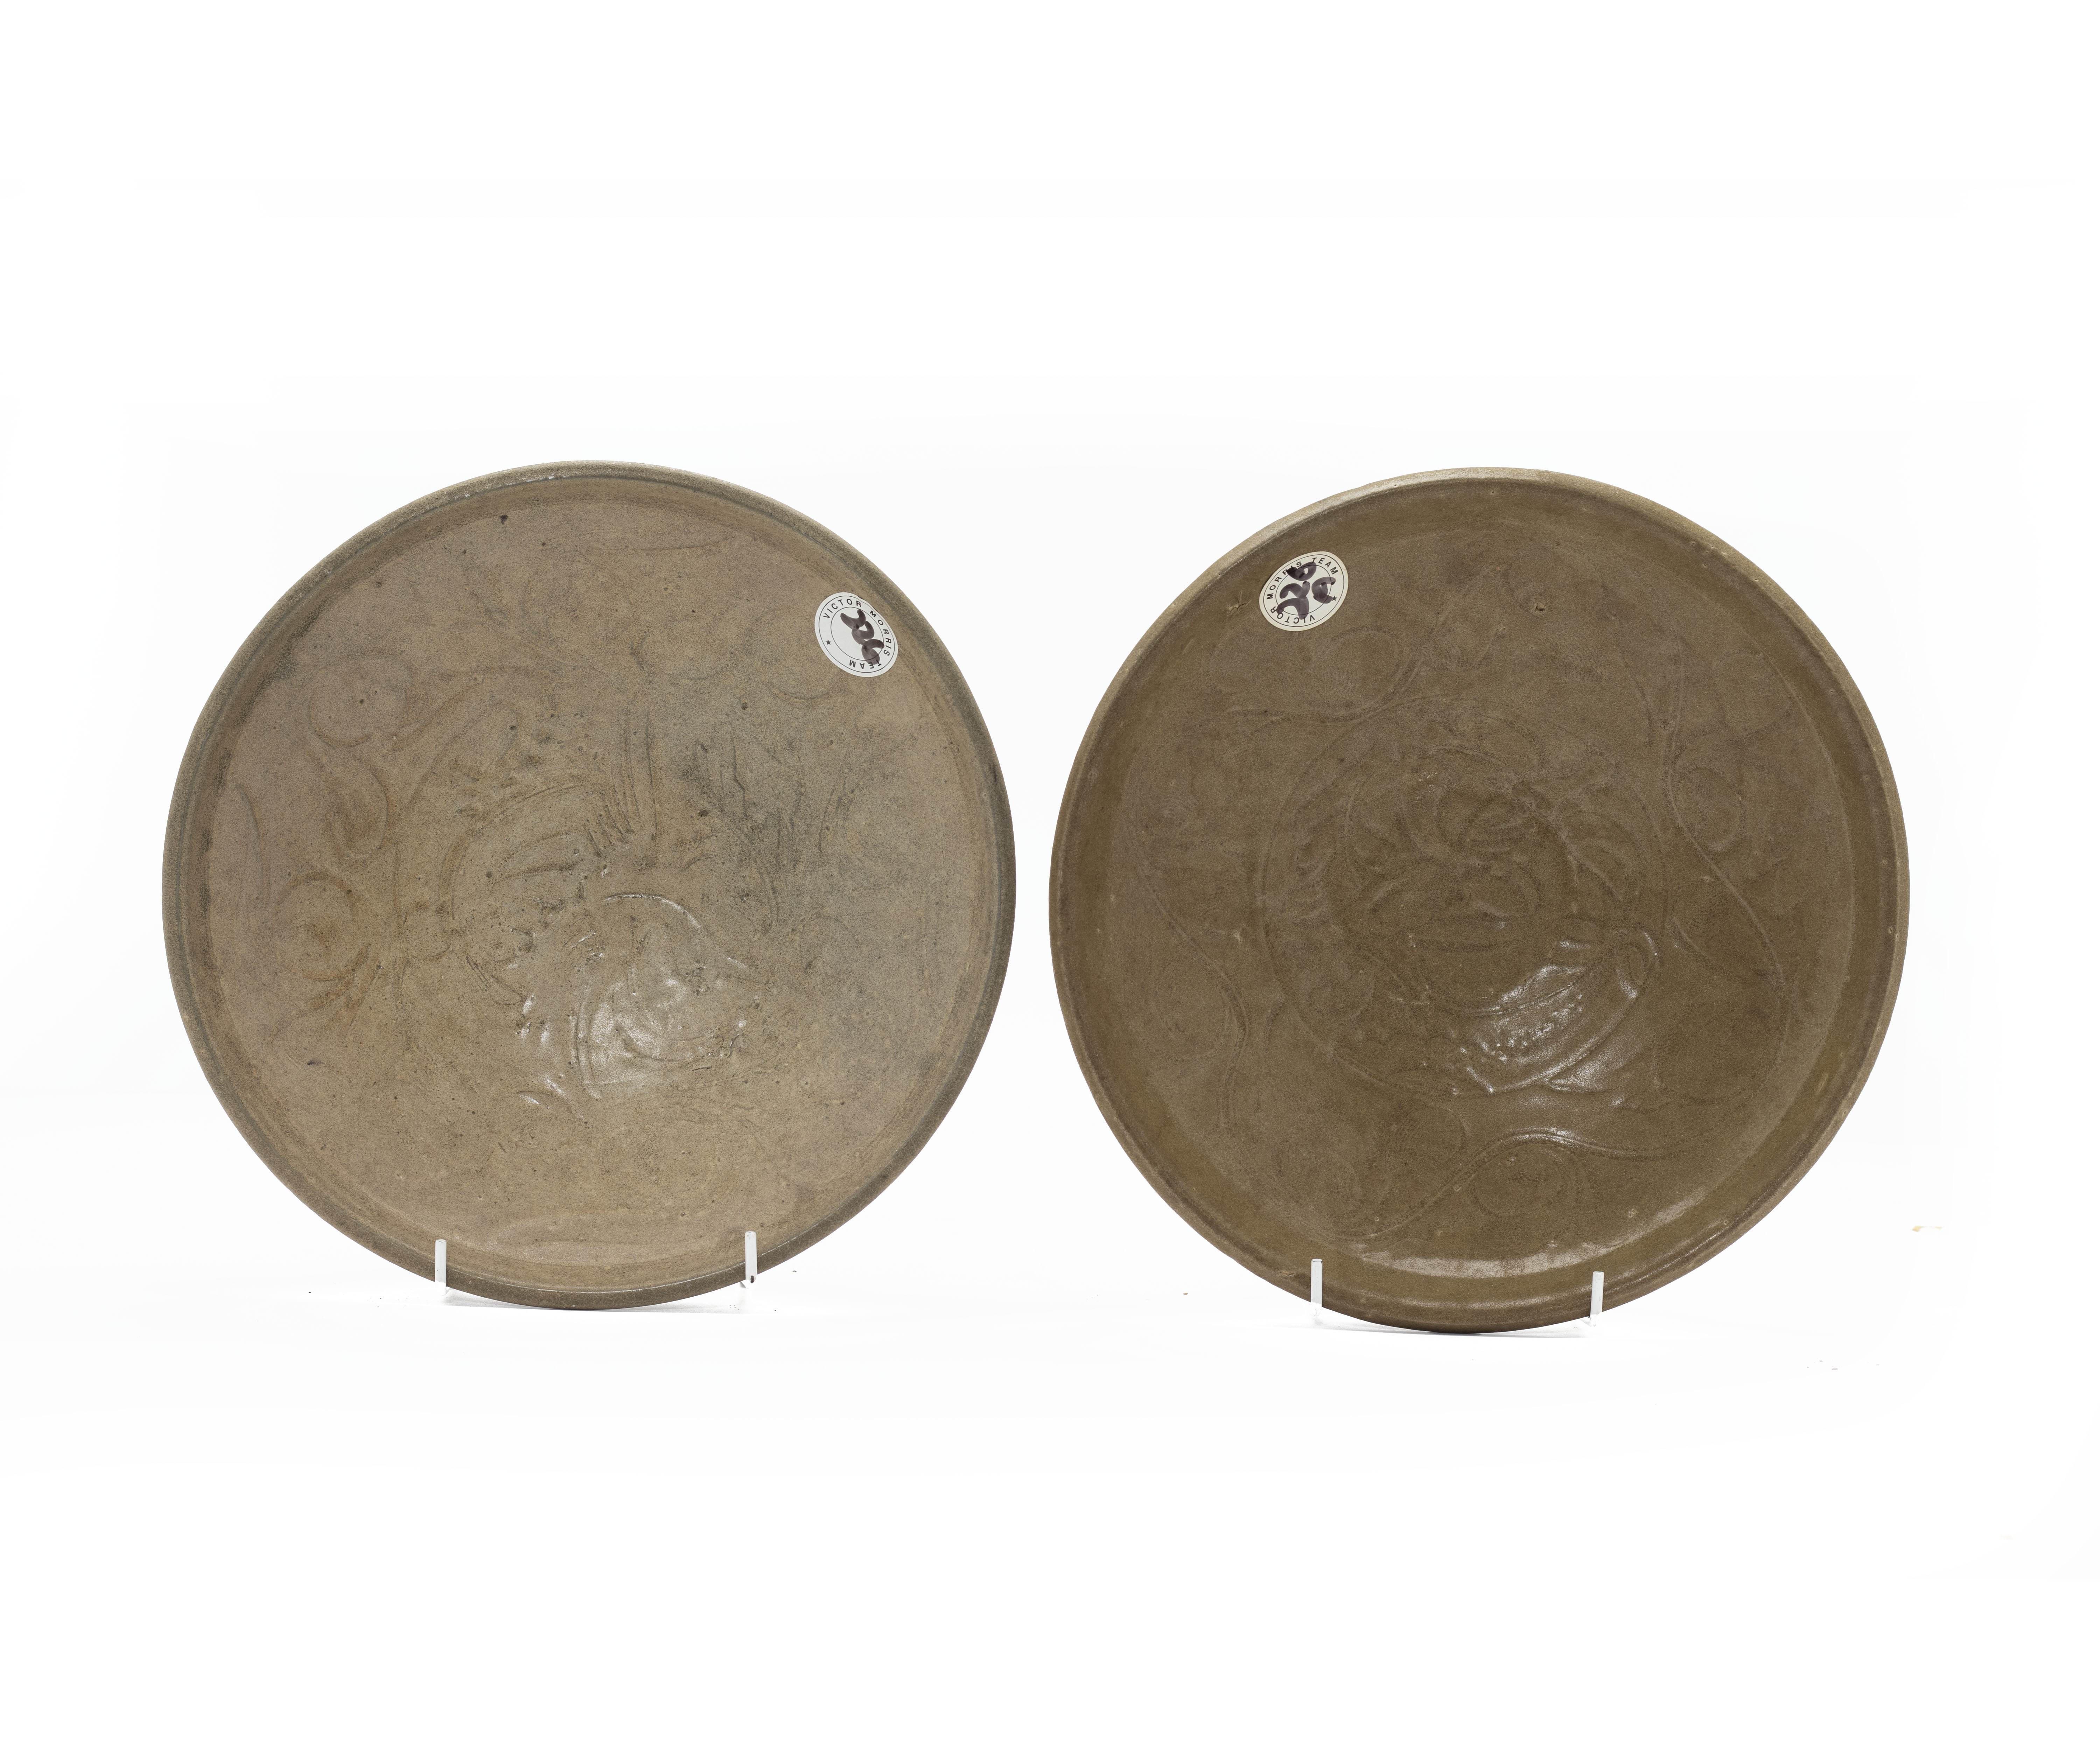 TWO INCISED CELADON SHALLOW BOWLS